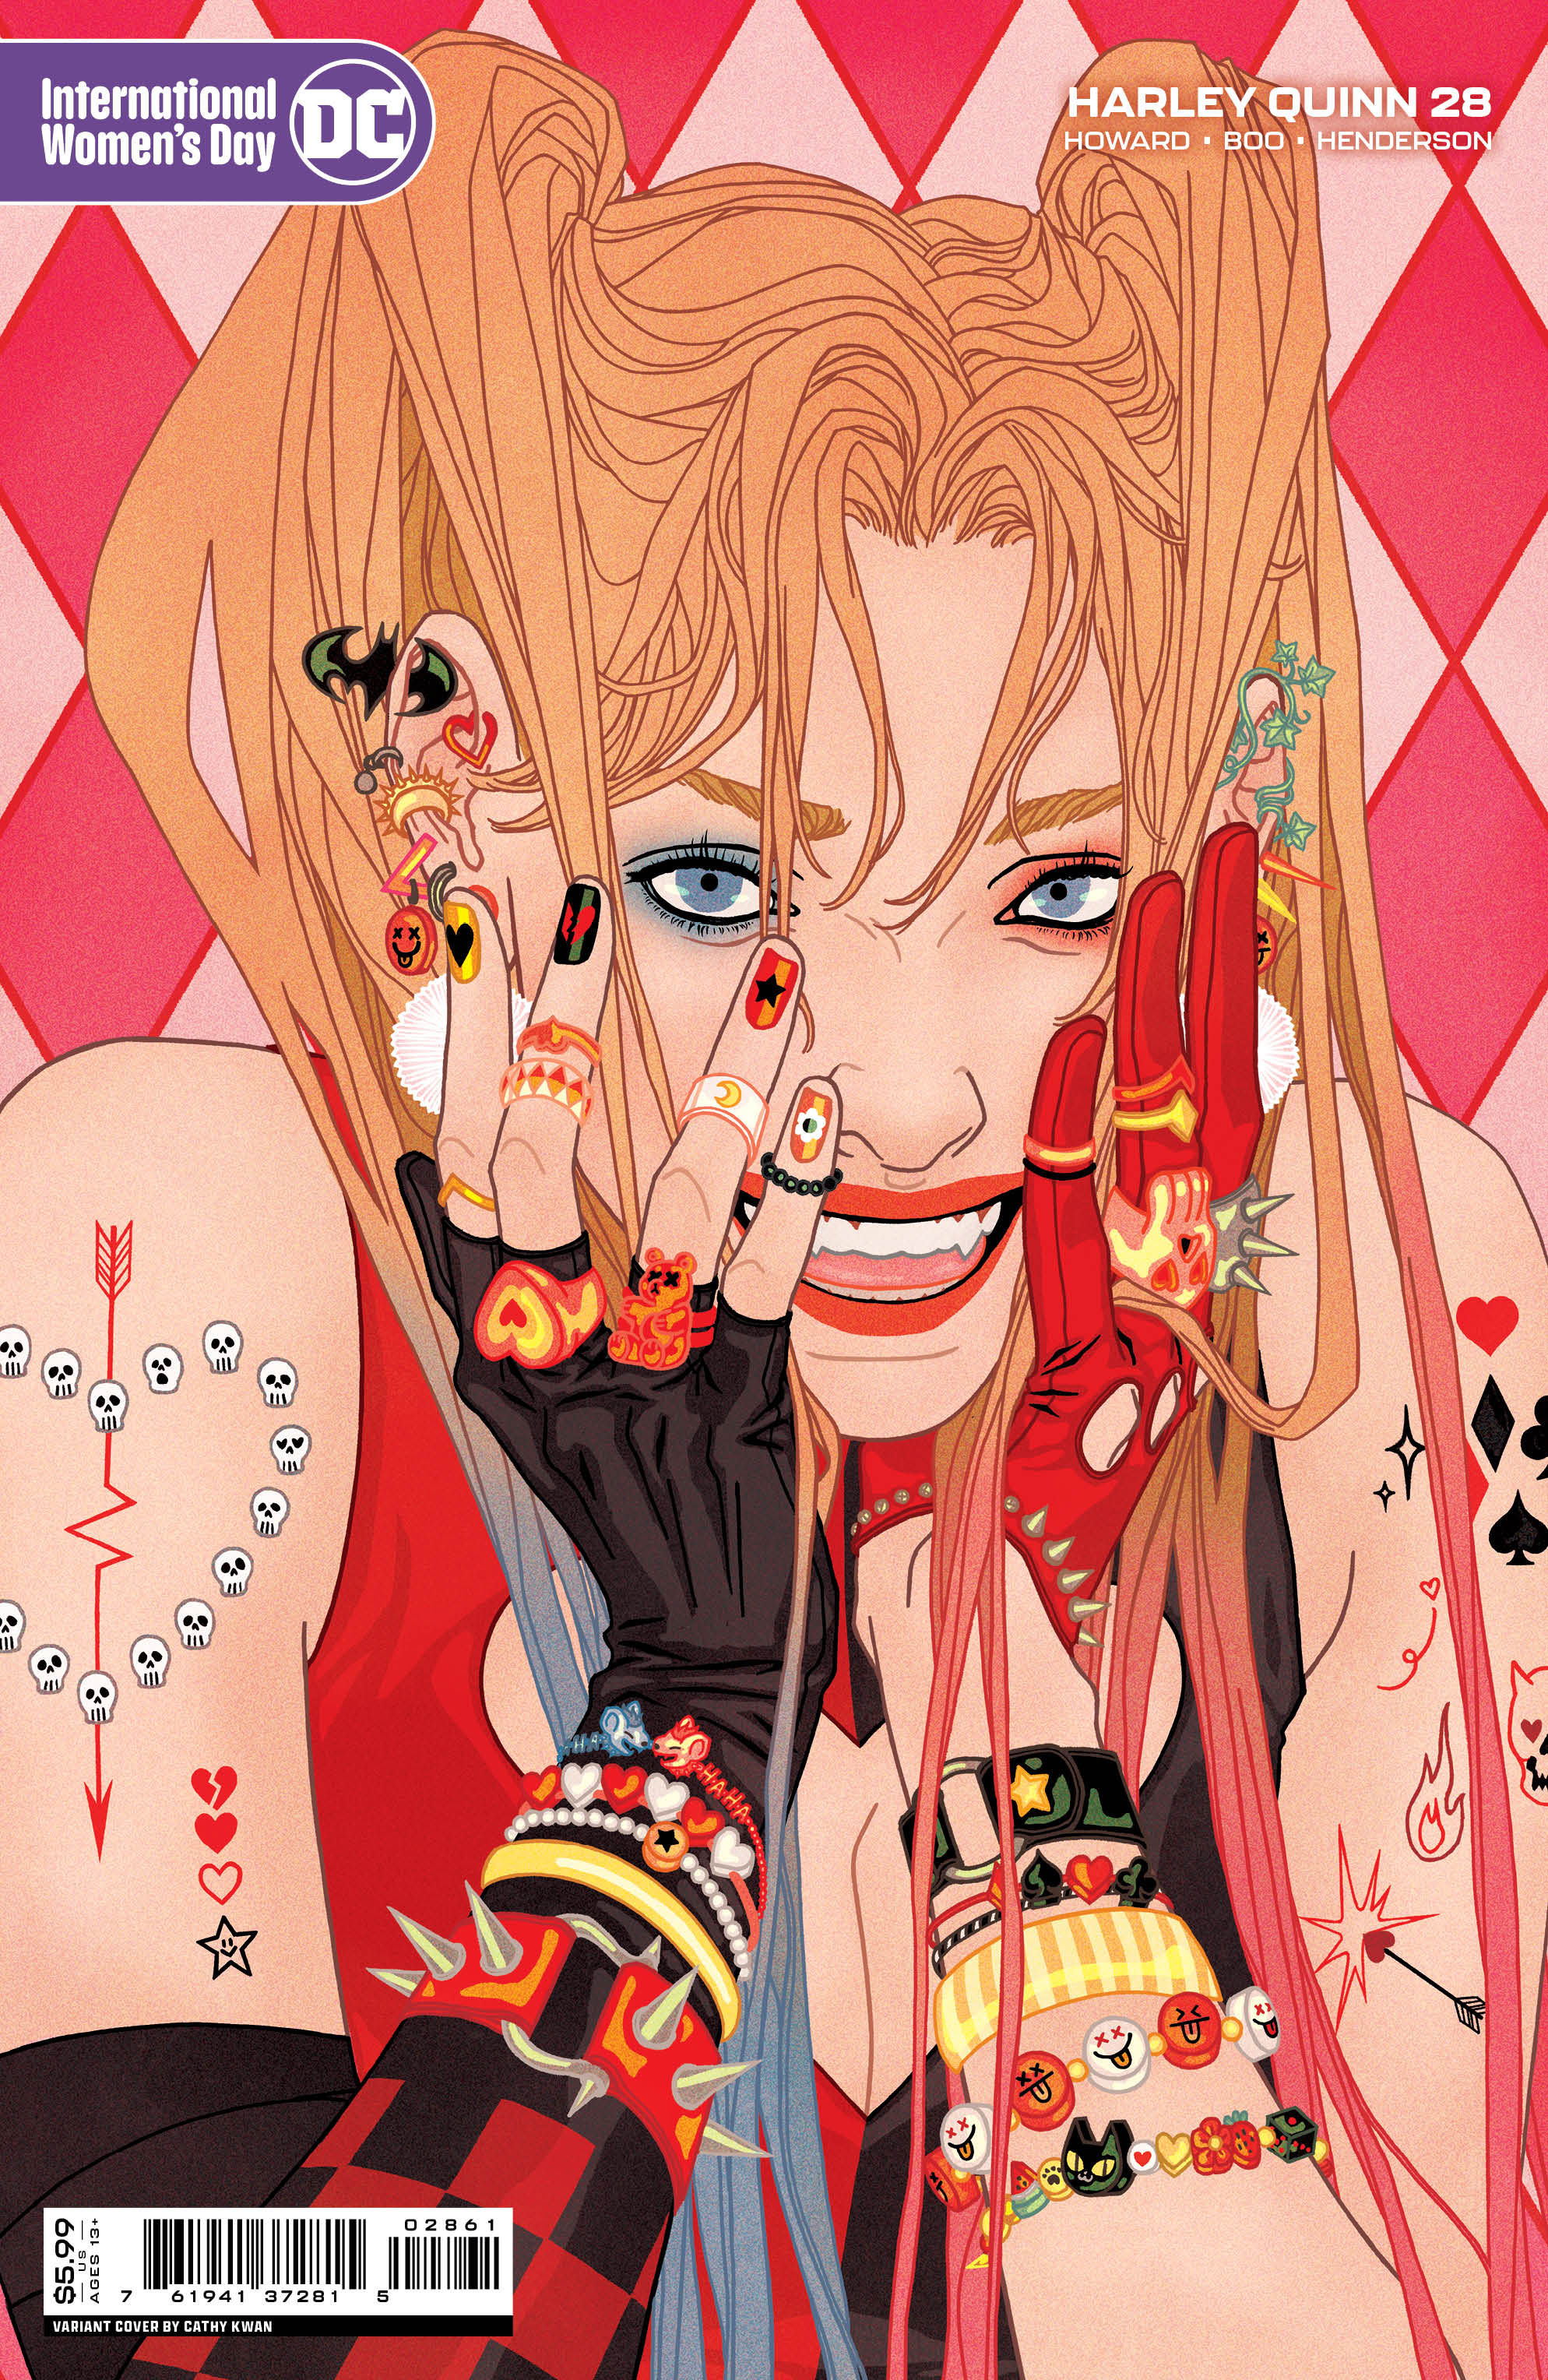 Illustration of Harley Quinn with her hands on her face